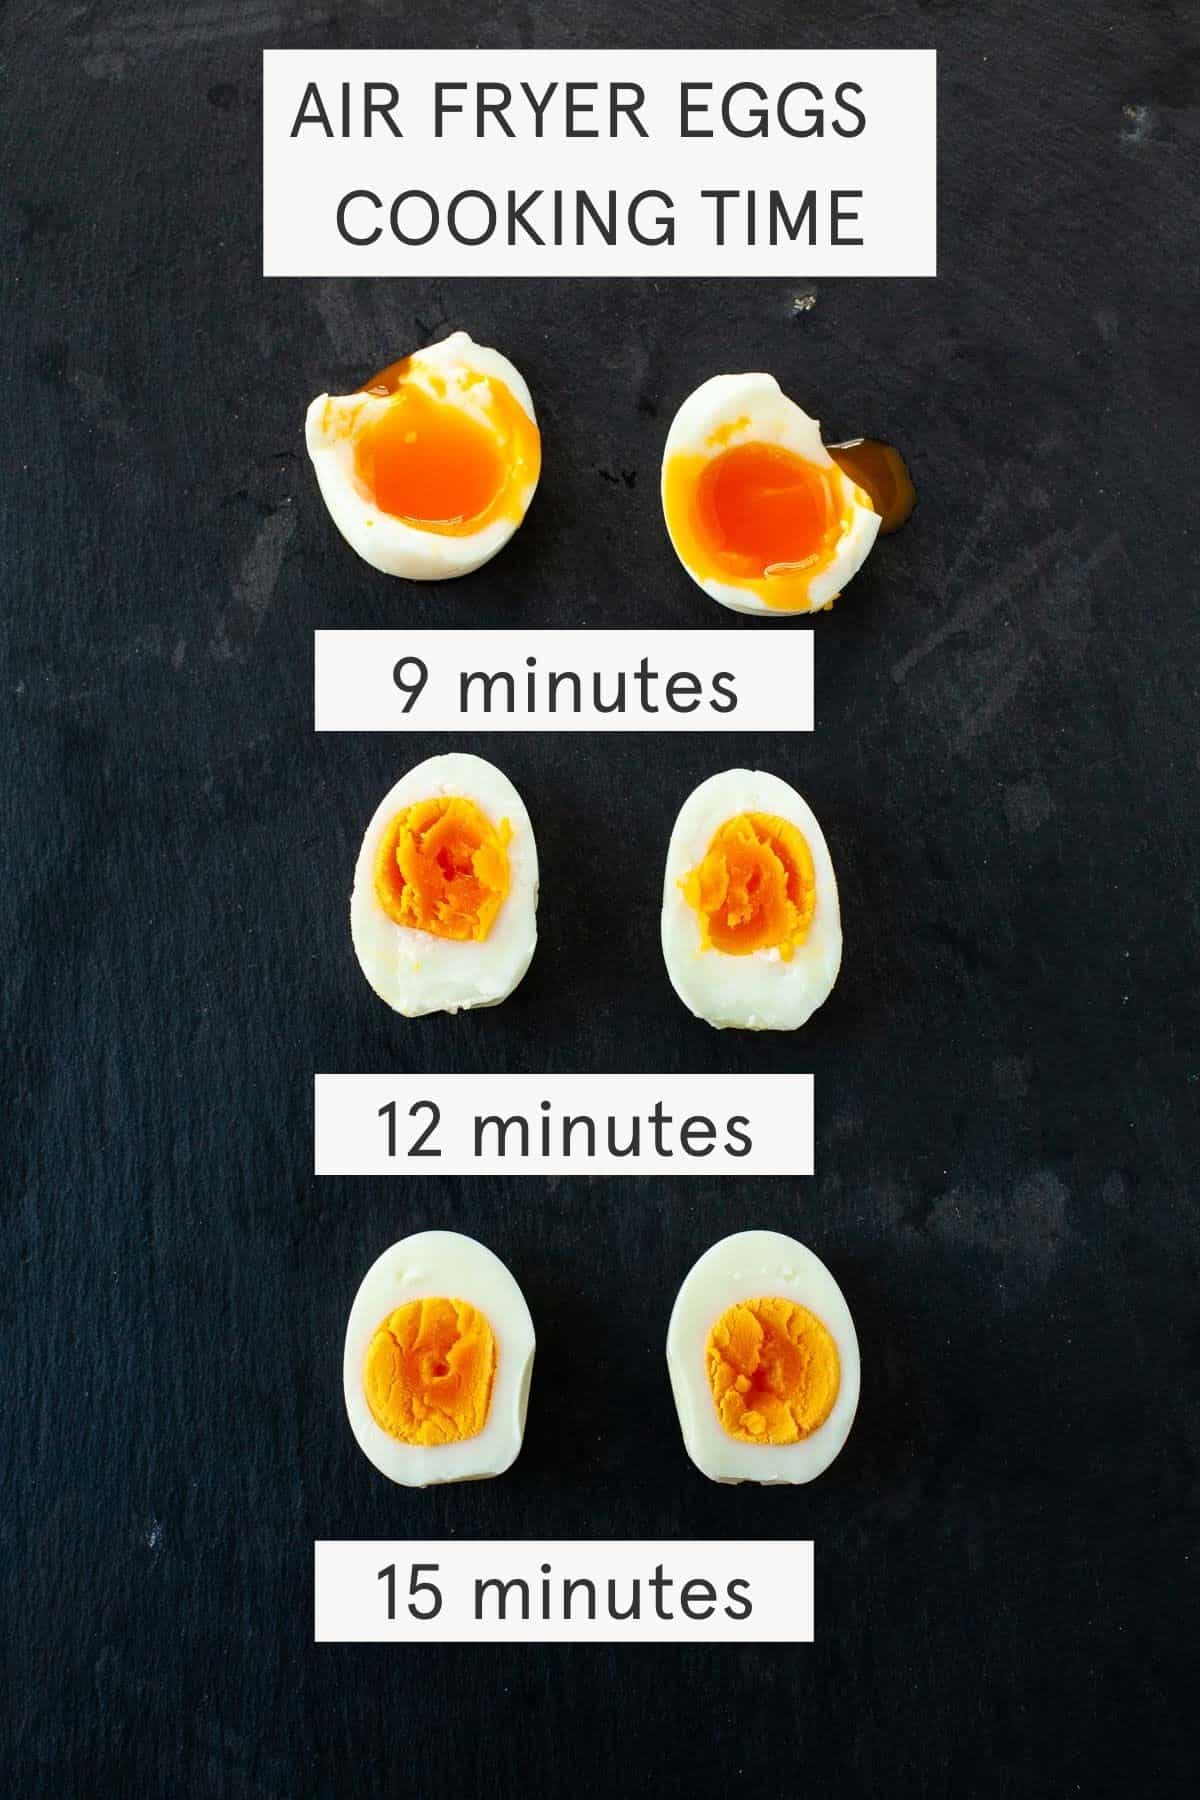 cook time, 9, 12, 15 minutes, eggs sliced in half on black background